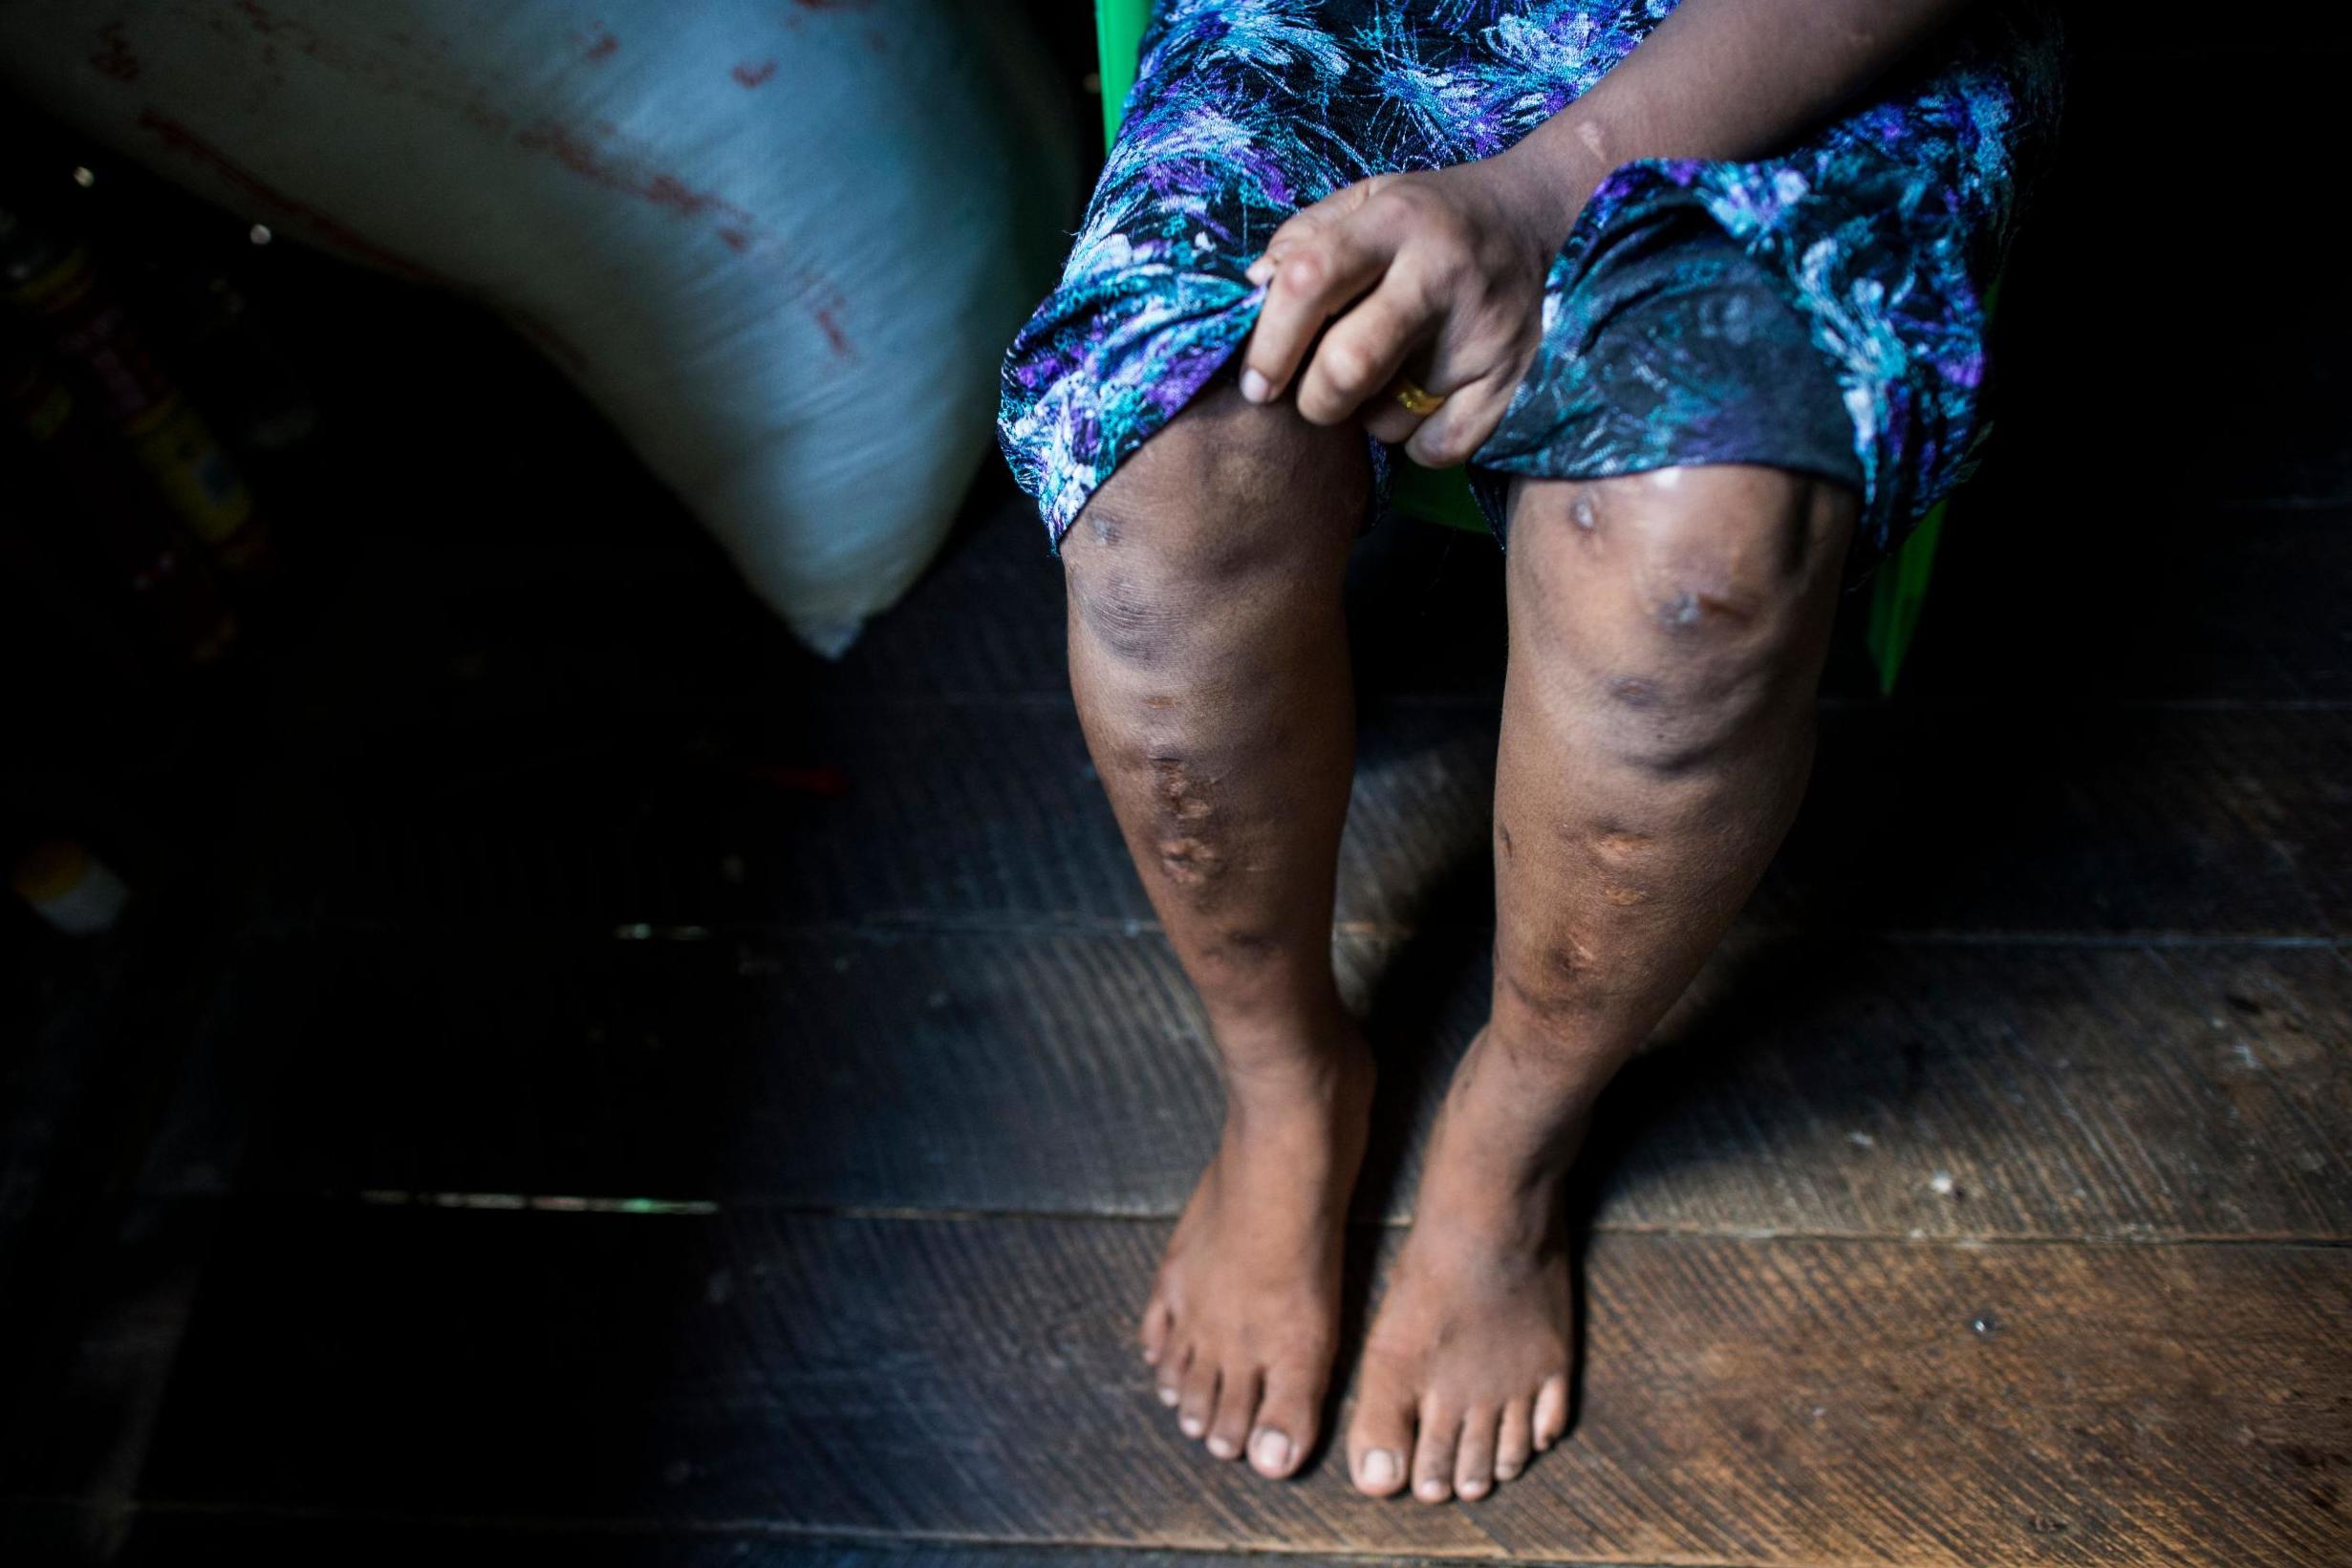 A 16-year old Myanmar child slave, with deep scars, recovers in a relative’s house (AFP/Getty)